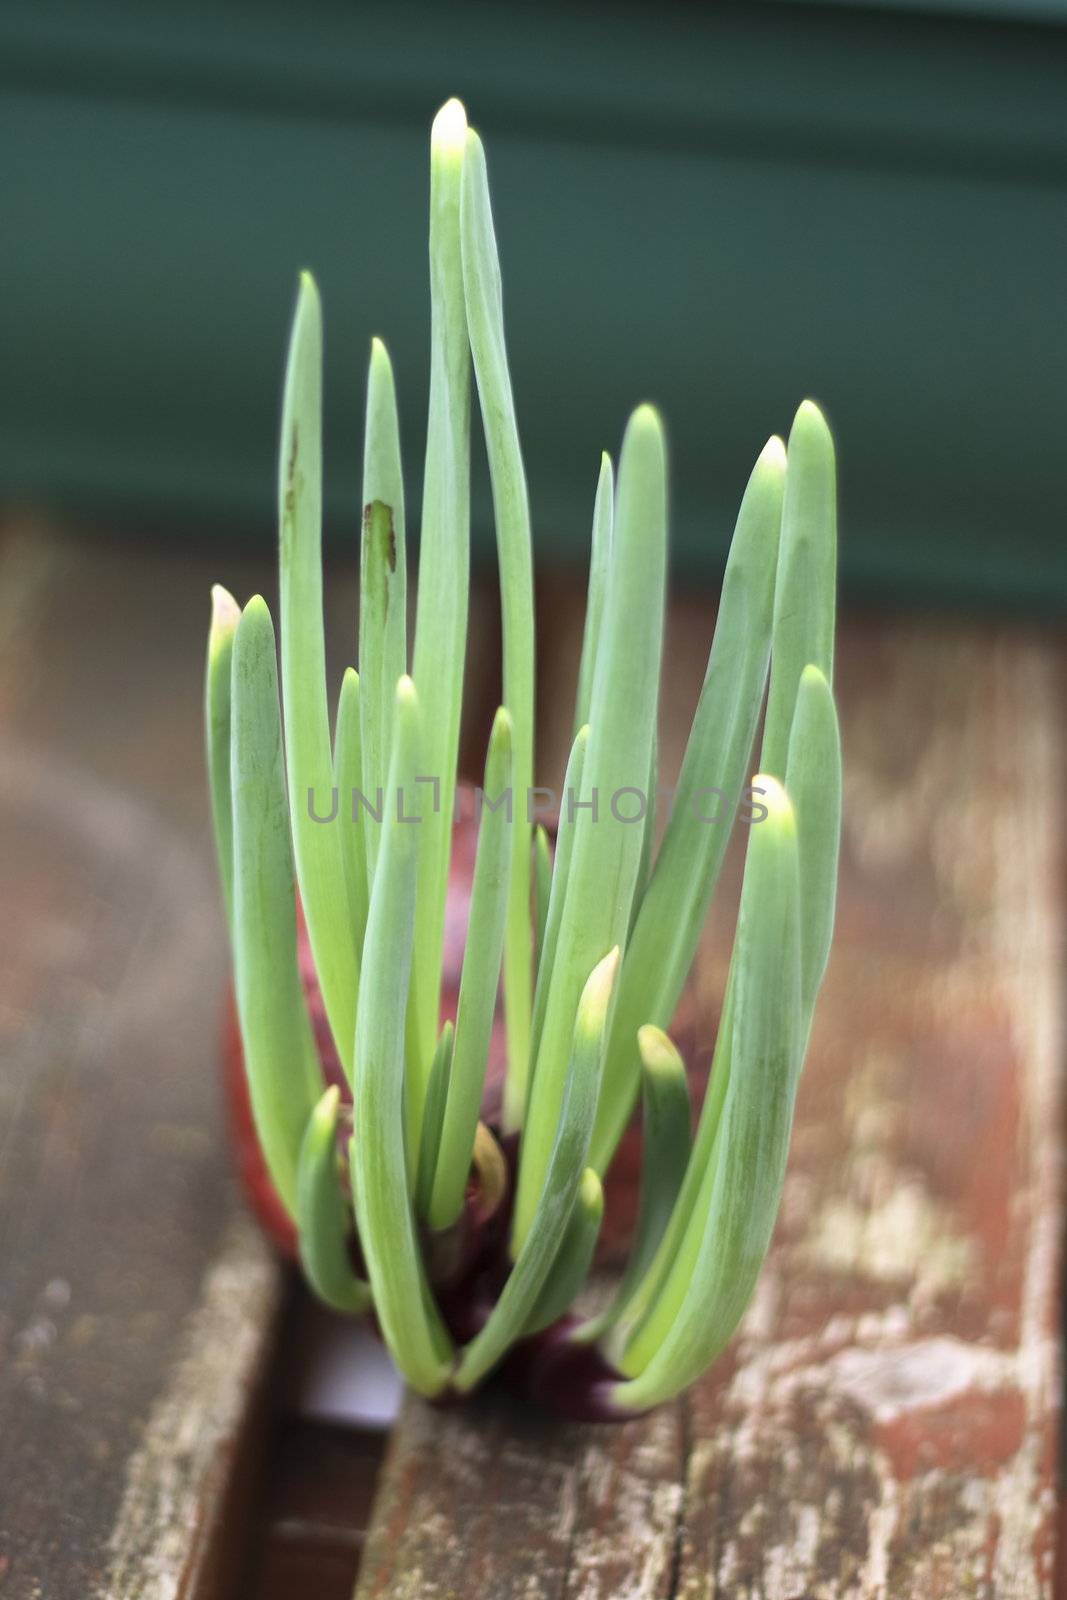 a red onion showing new shoots as it regrows in the spring